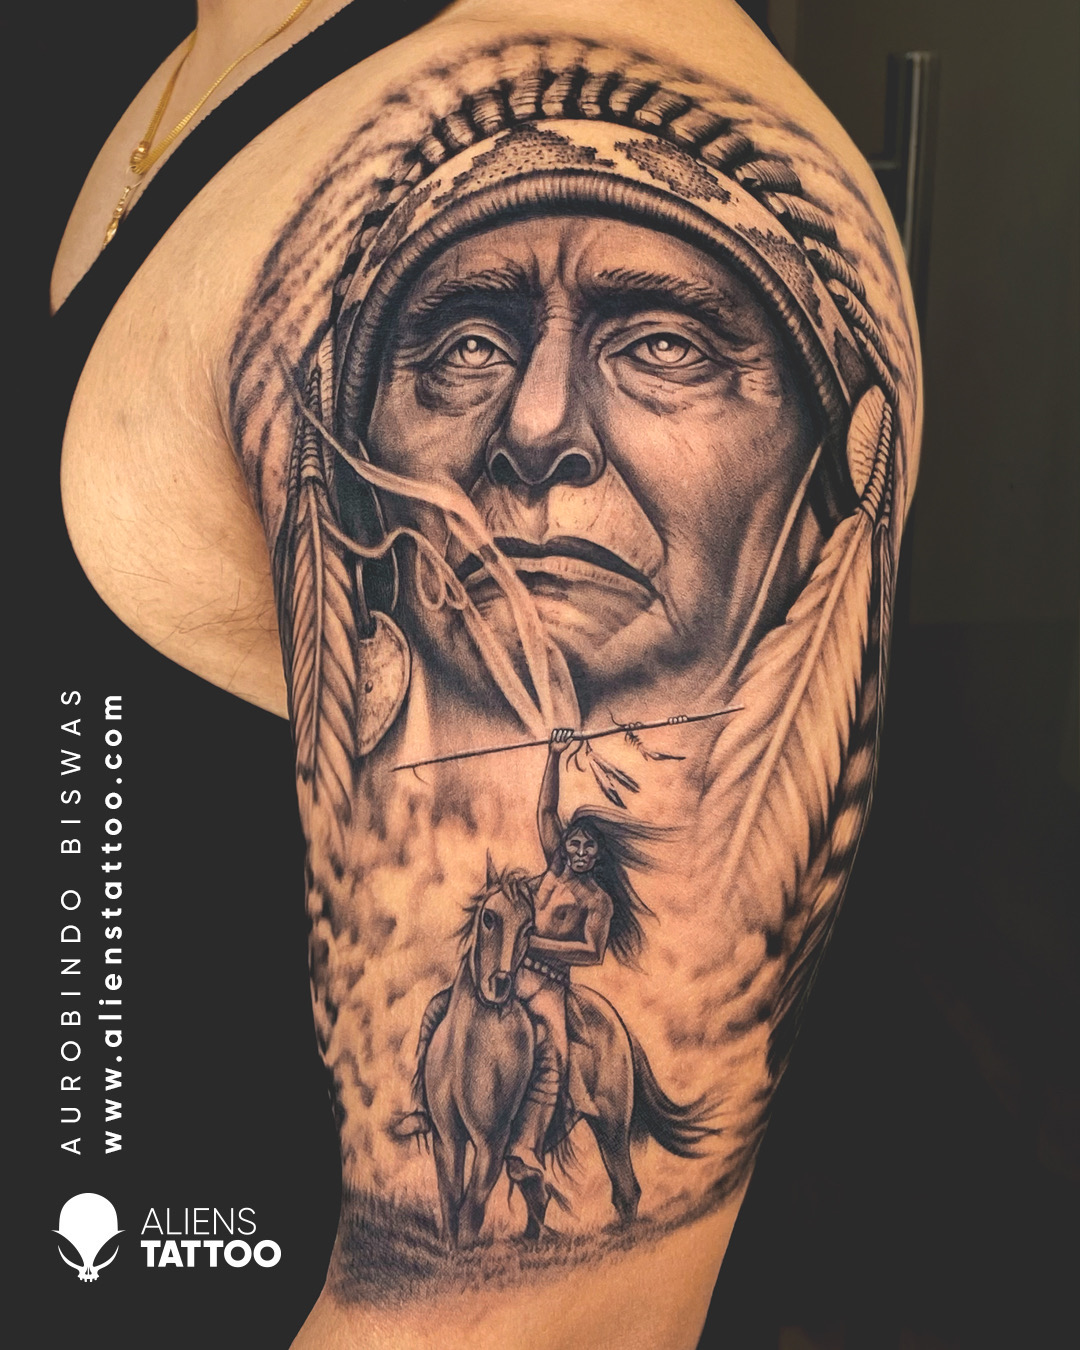 The Best of Indian Tattoo Artists at LVINK - Lv ink